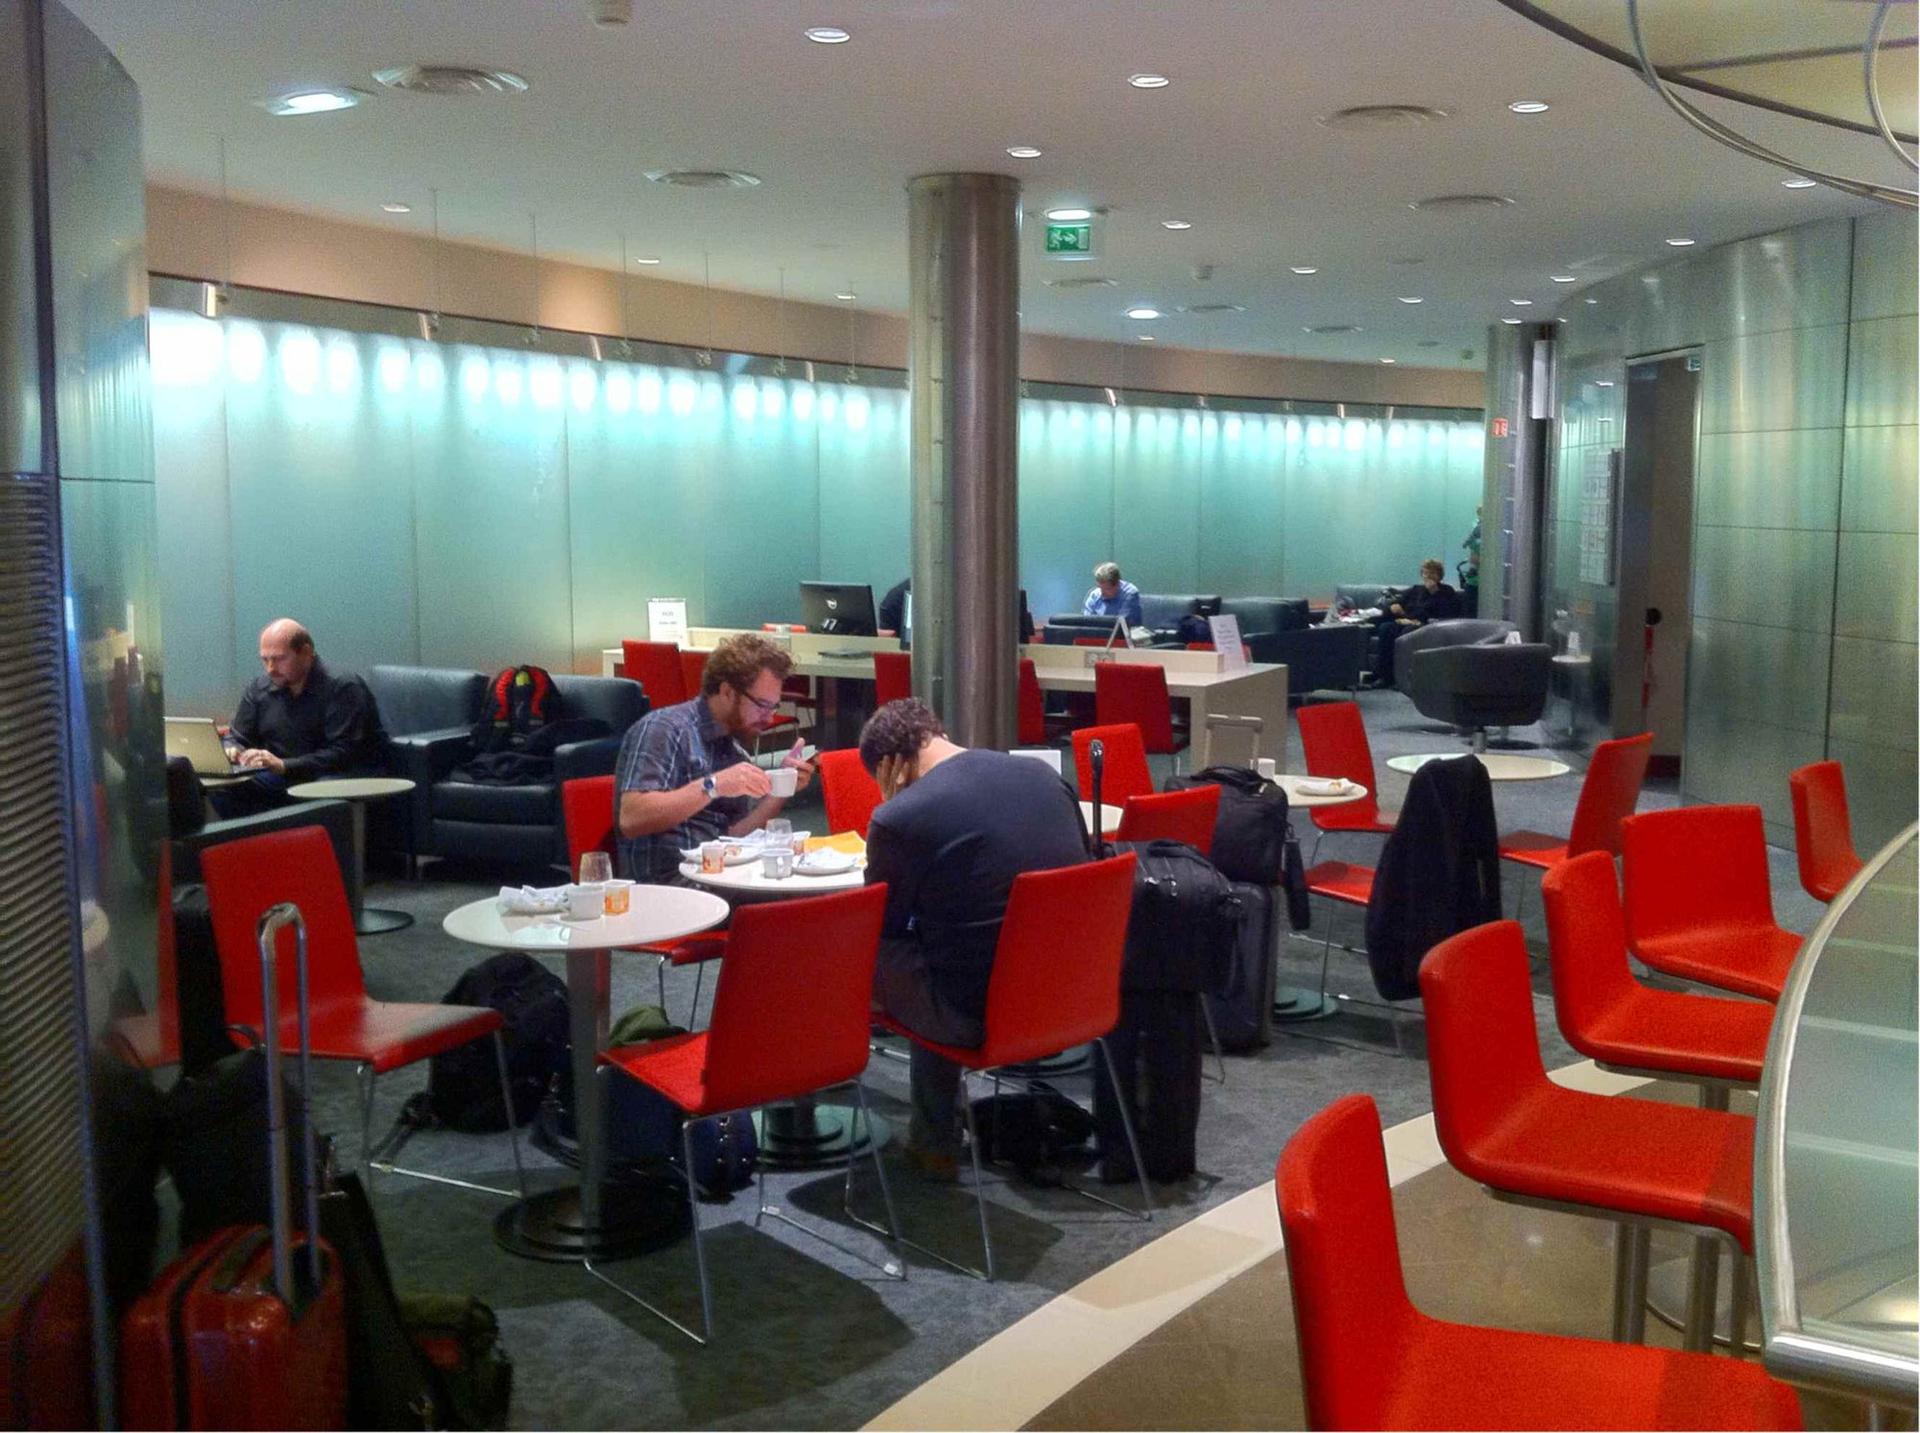 Air Canada Maple Leaf Lounge image 14 of 64